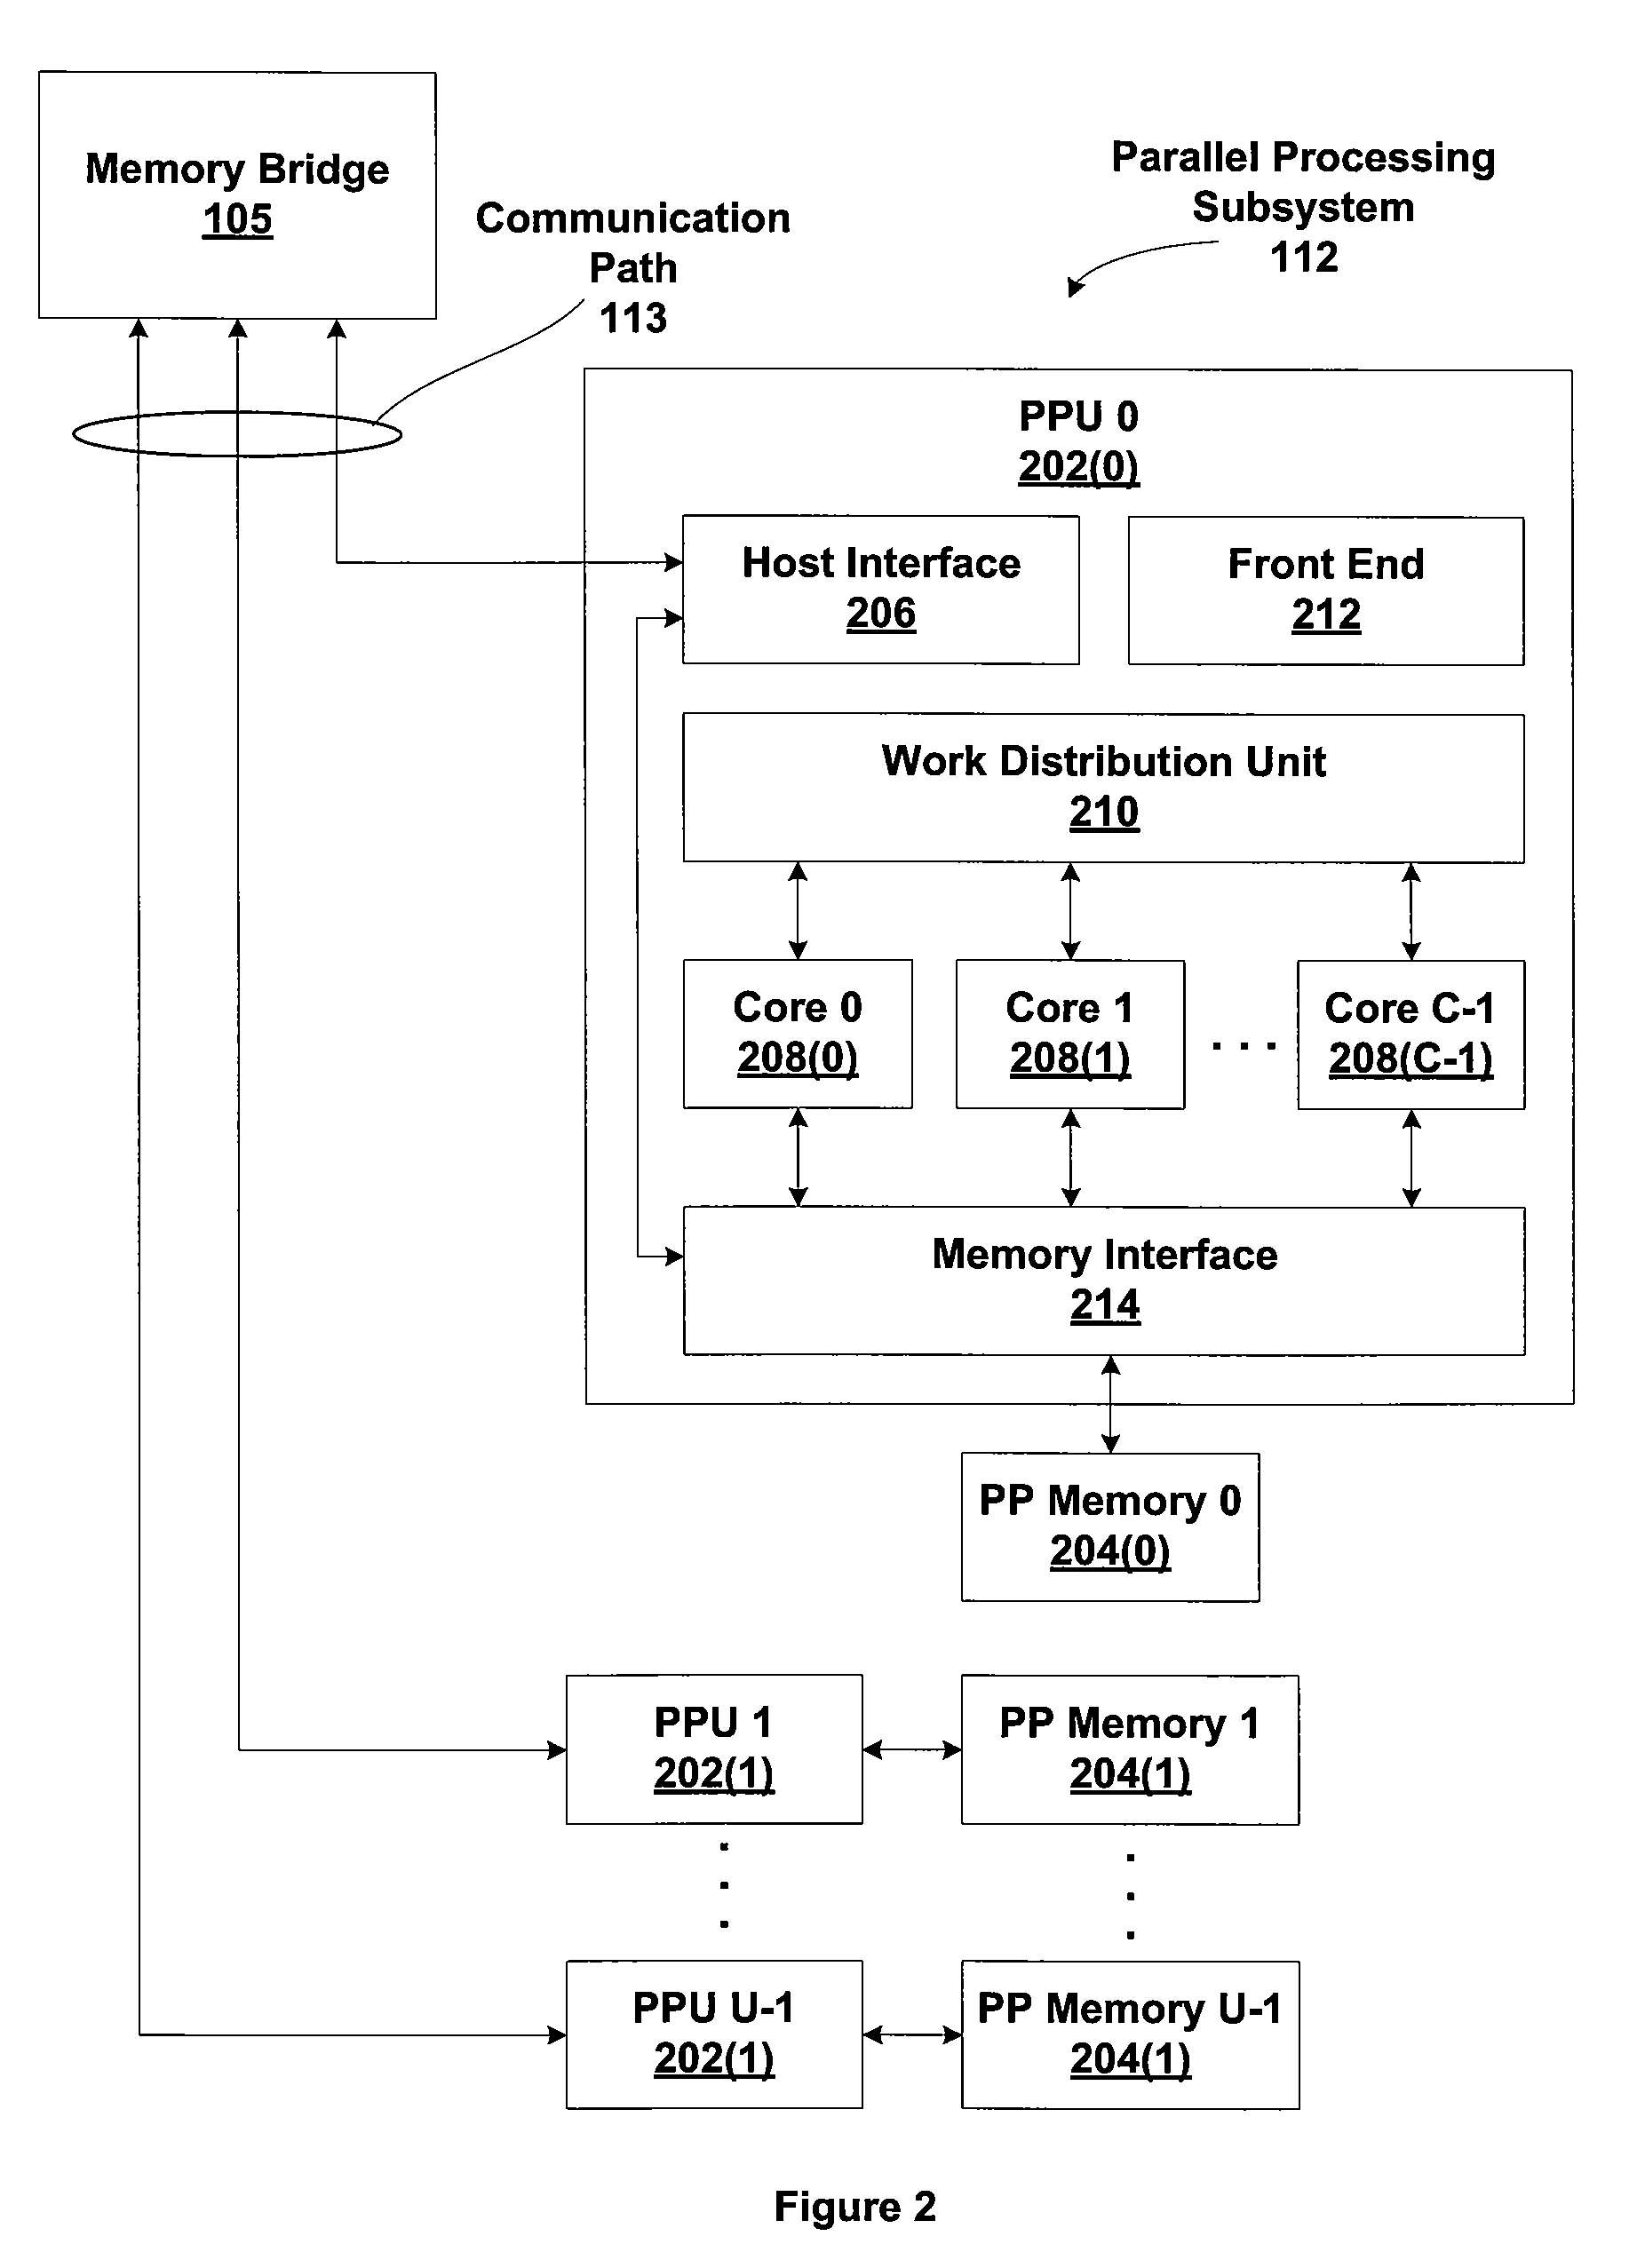 Structured programming control flow in a SIMD architecture